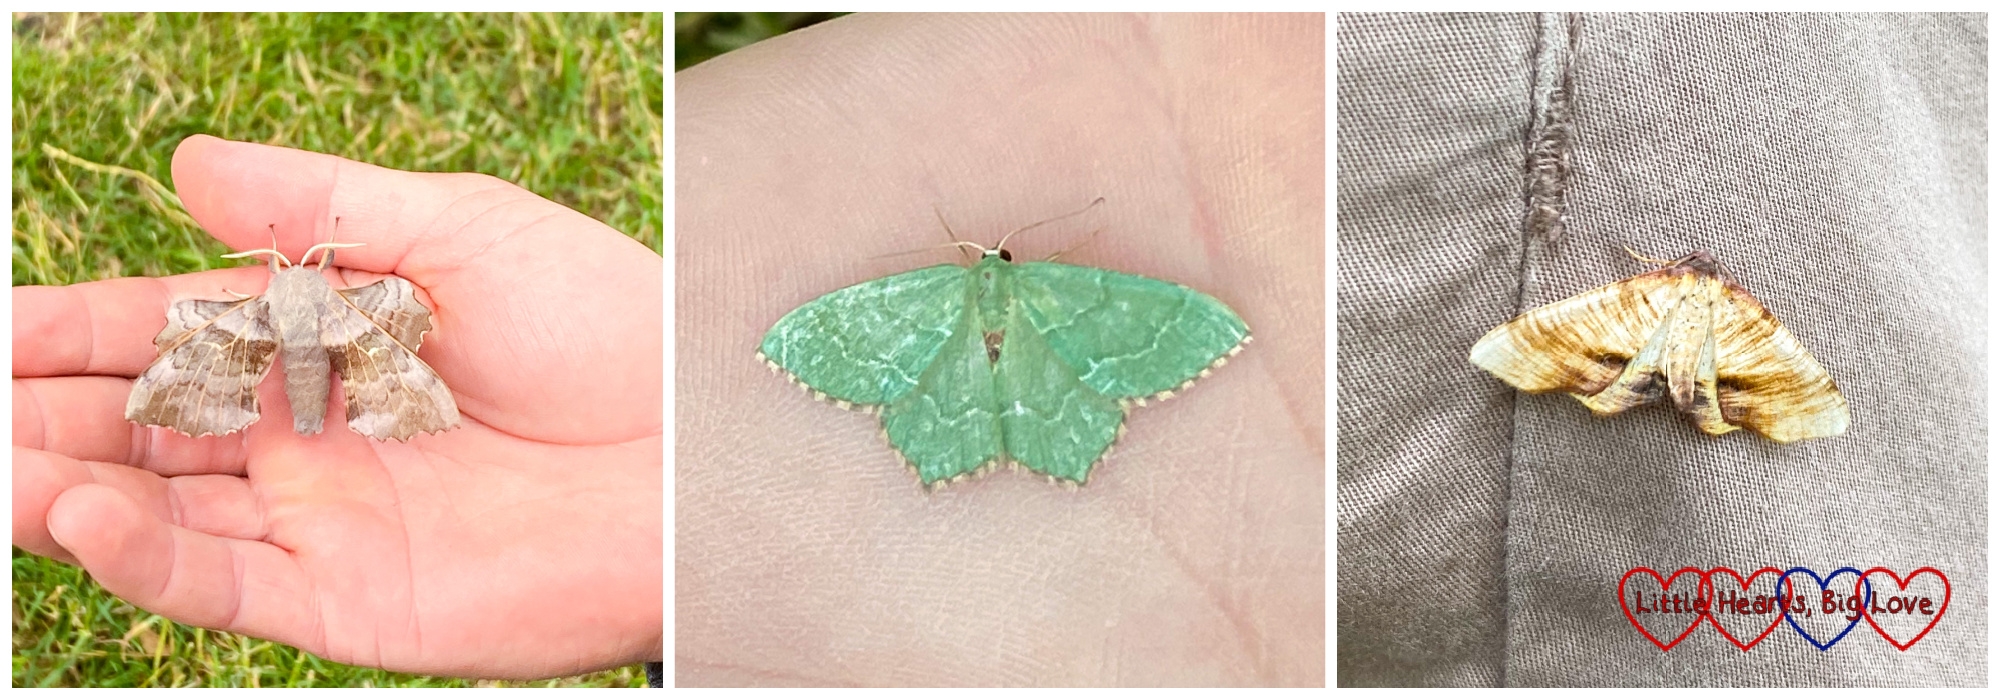 A poplar hawk moth, a common emerald moth and a scorched wing moth